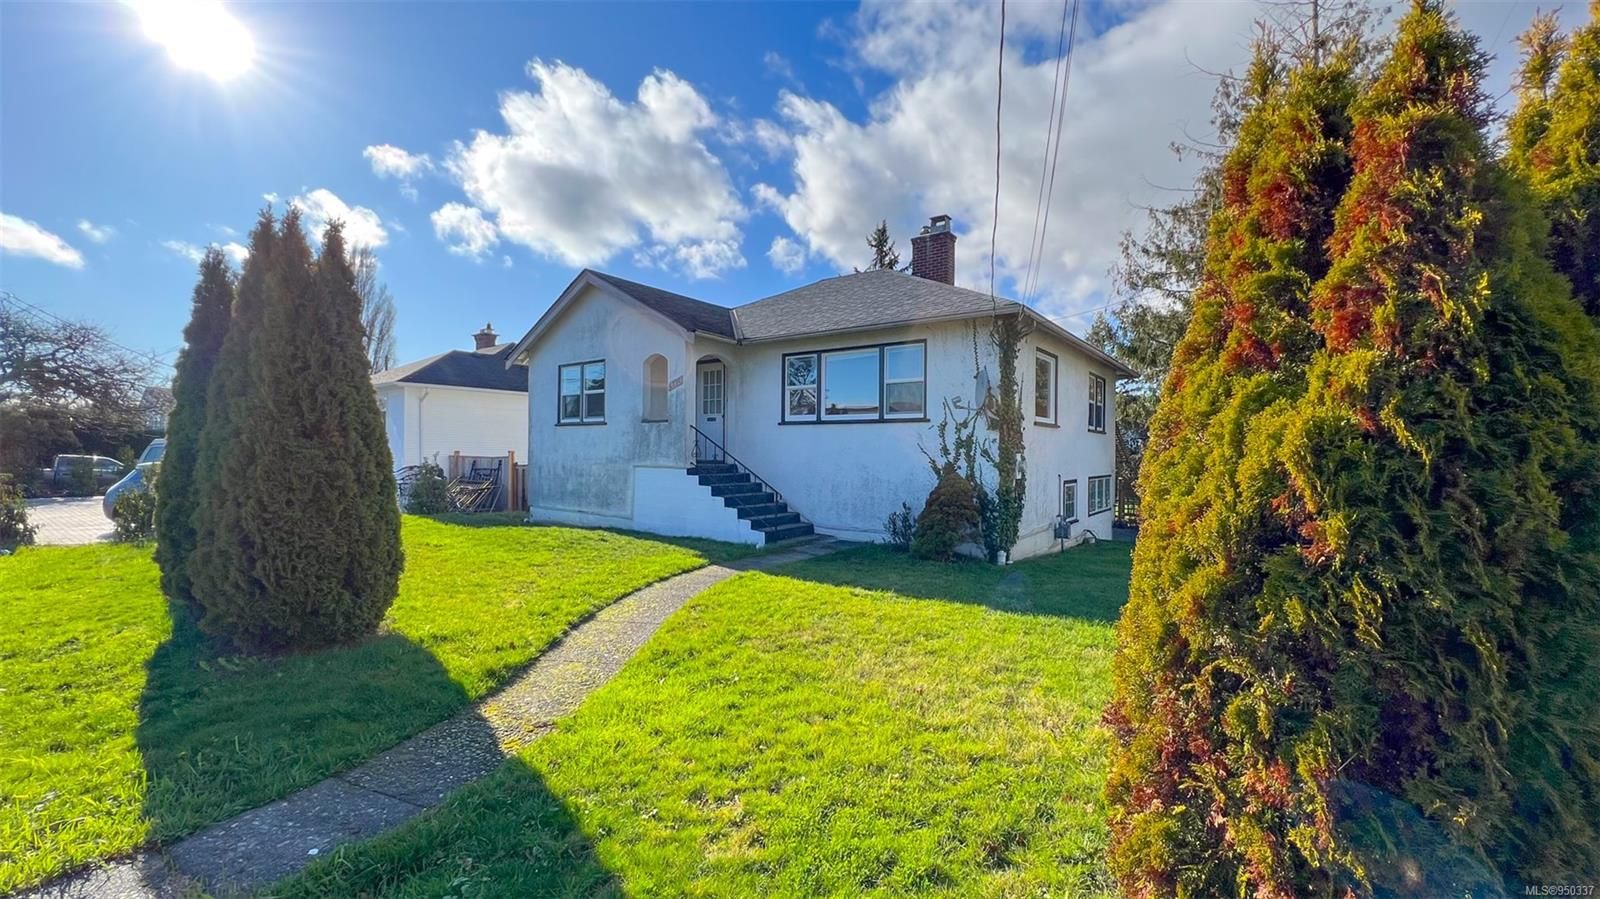 New property listed in SE Camosun, Saanich East